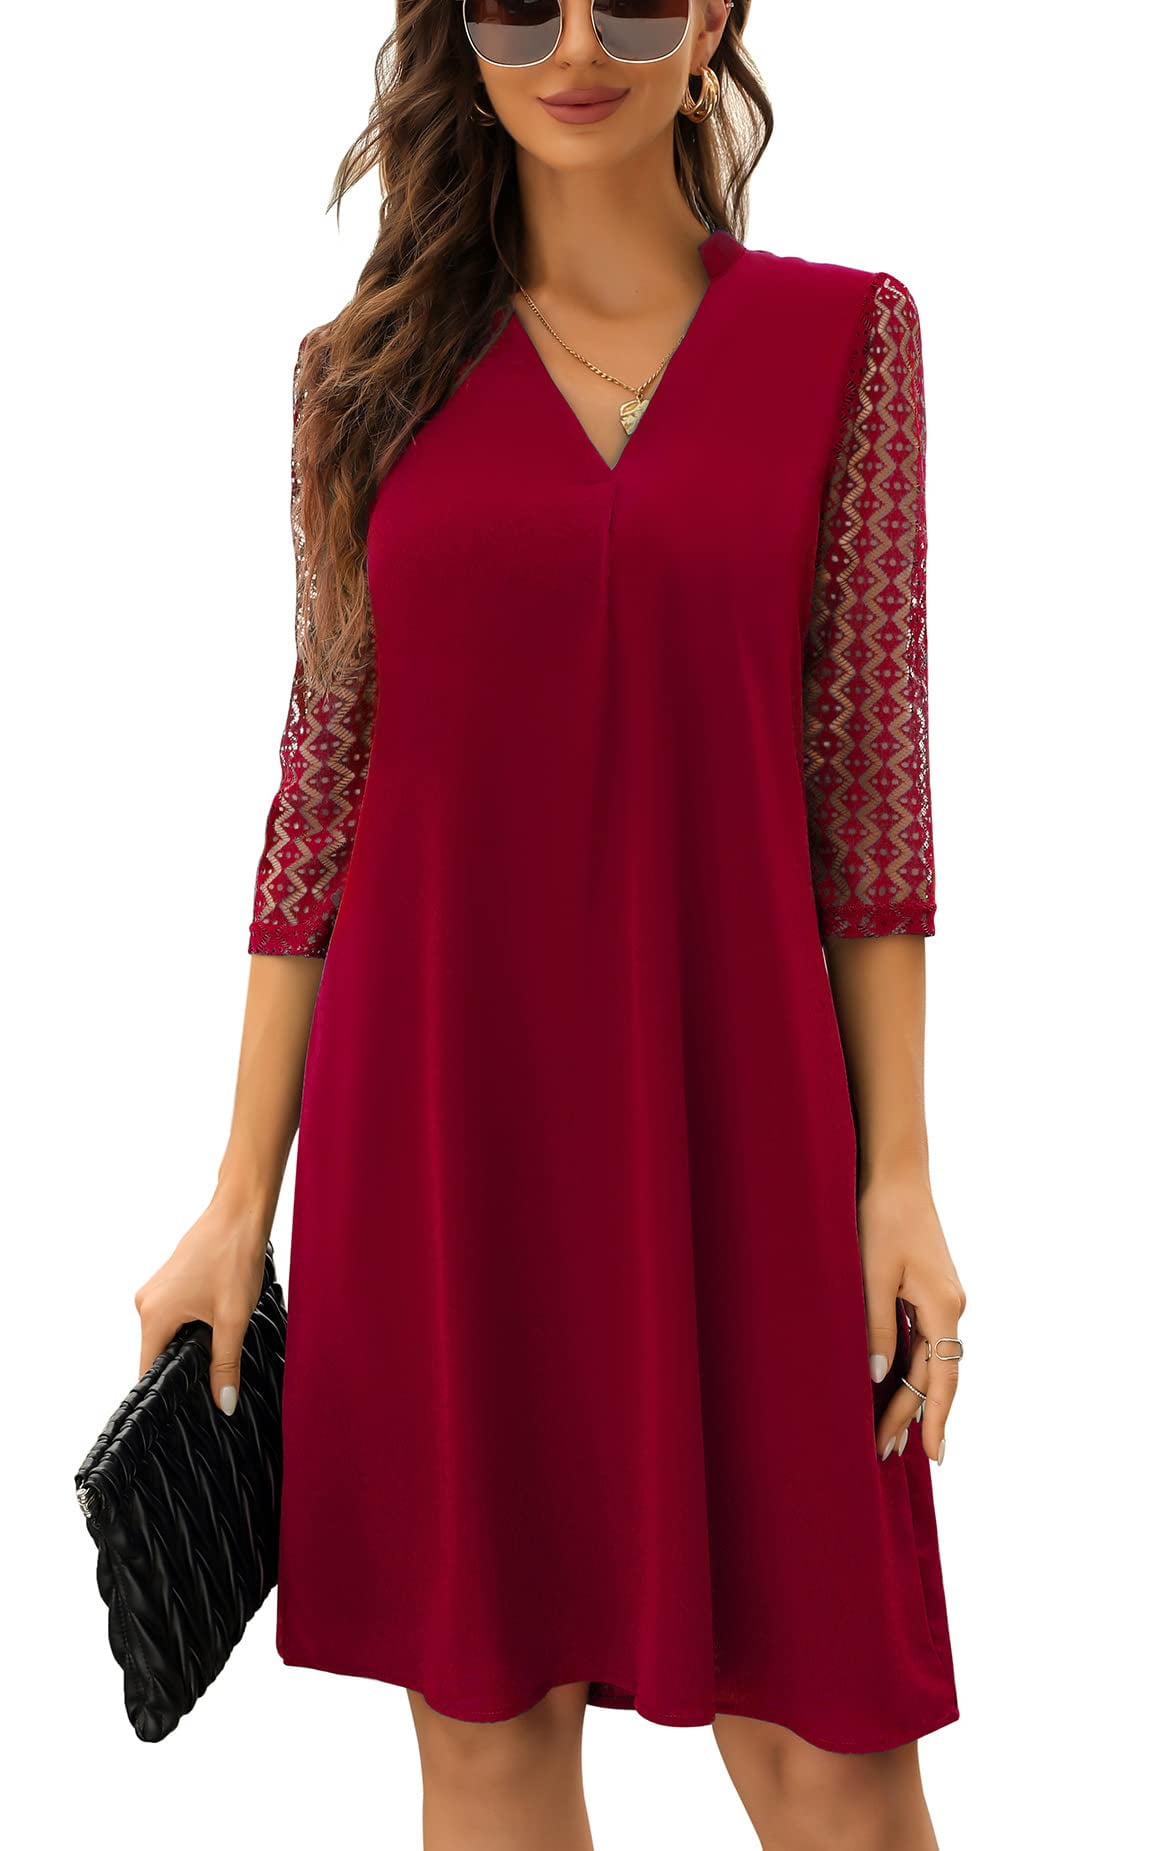 Oyang Women's Tunic Dress Lace 3/4 Sleeve Shift Dress V Neck Casual Work  Office Loose Dresses